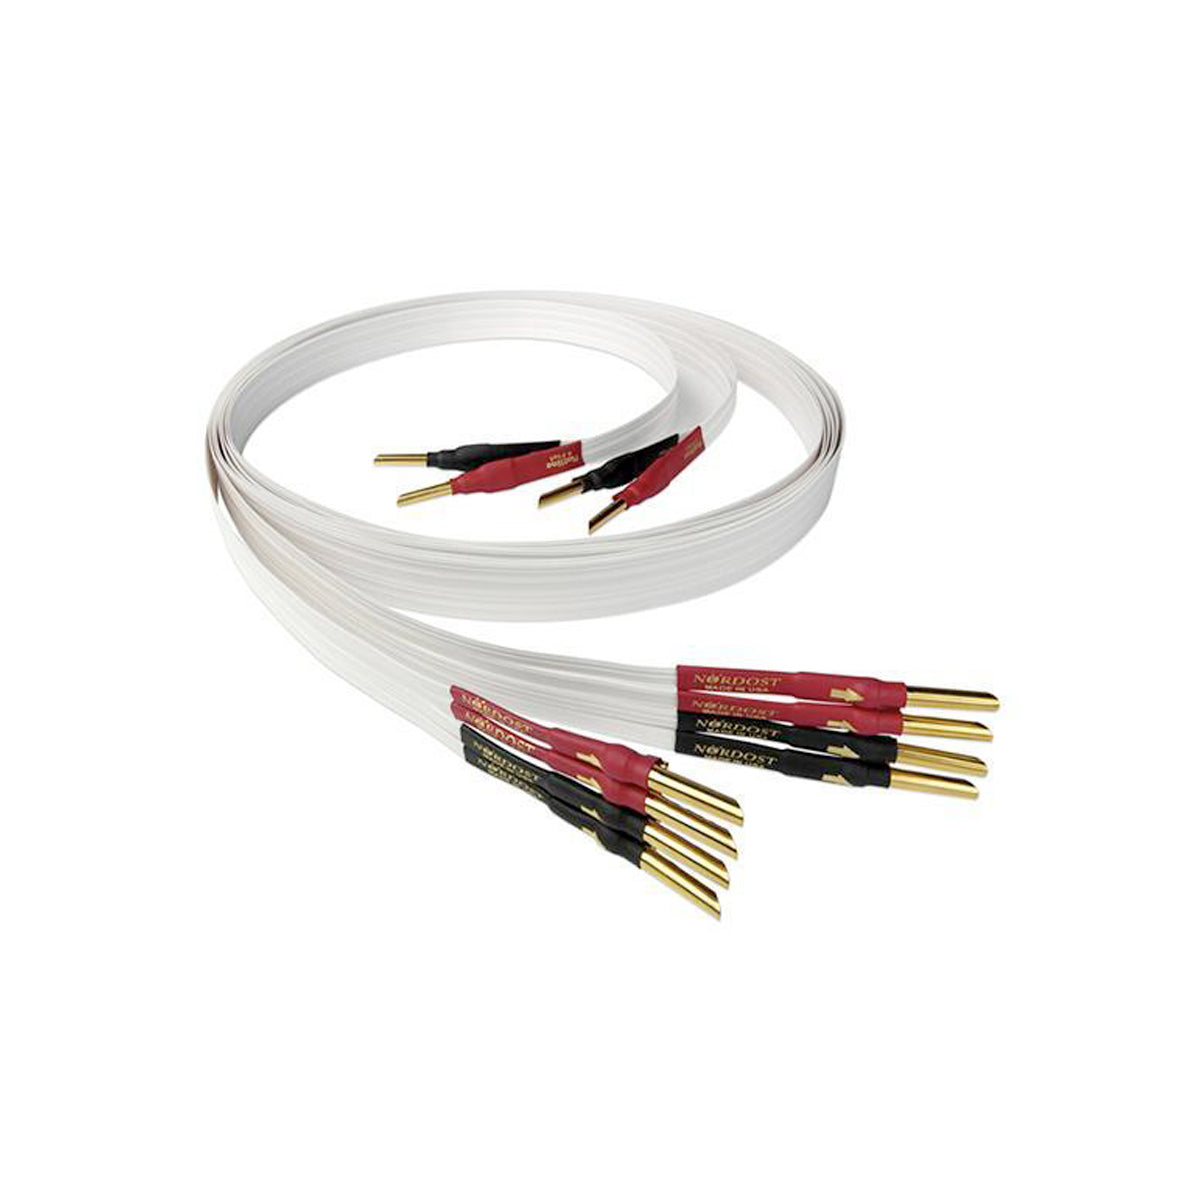 Nordost 4 Flat Speaker Cable - The Audio Experts